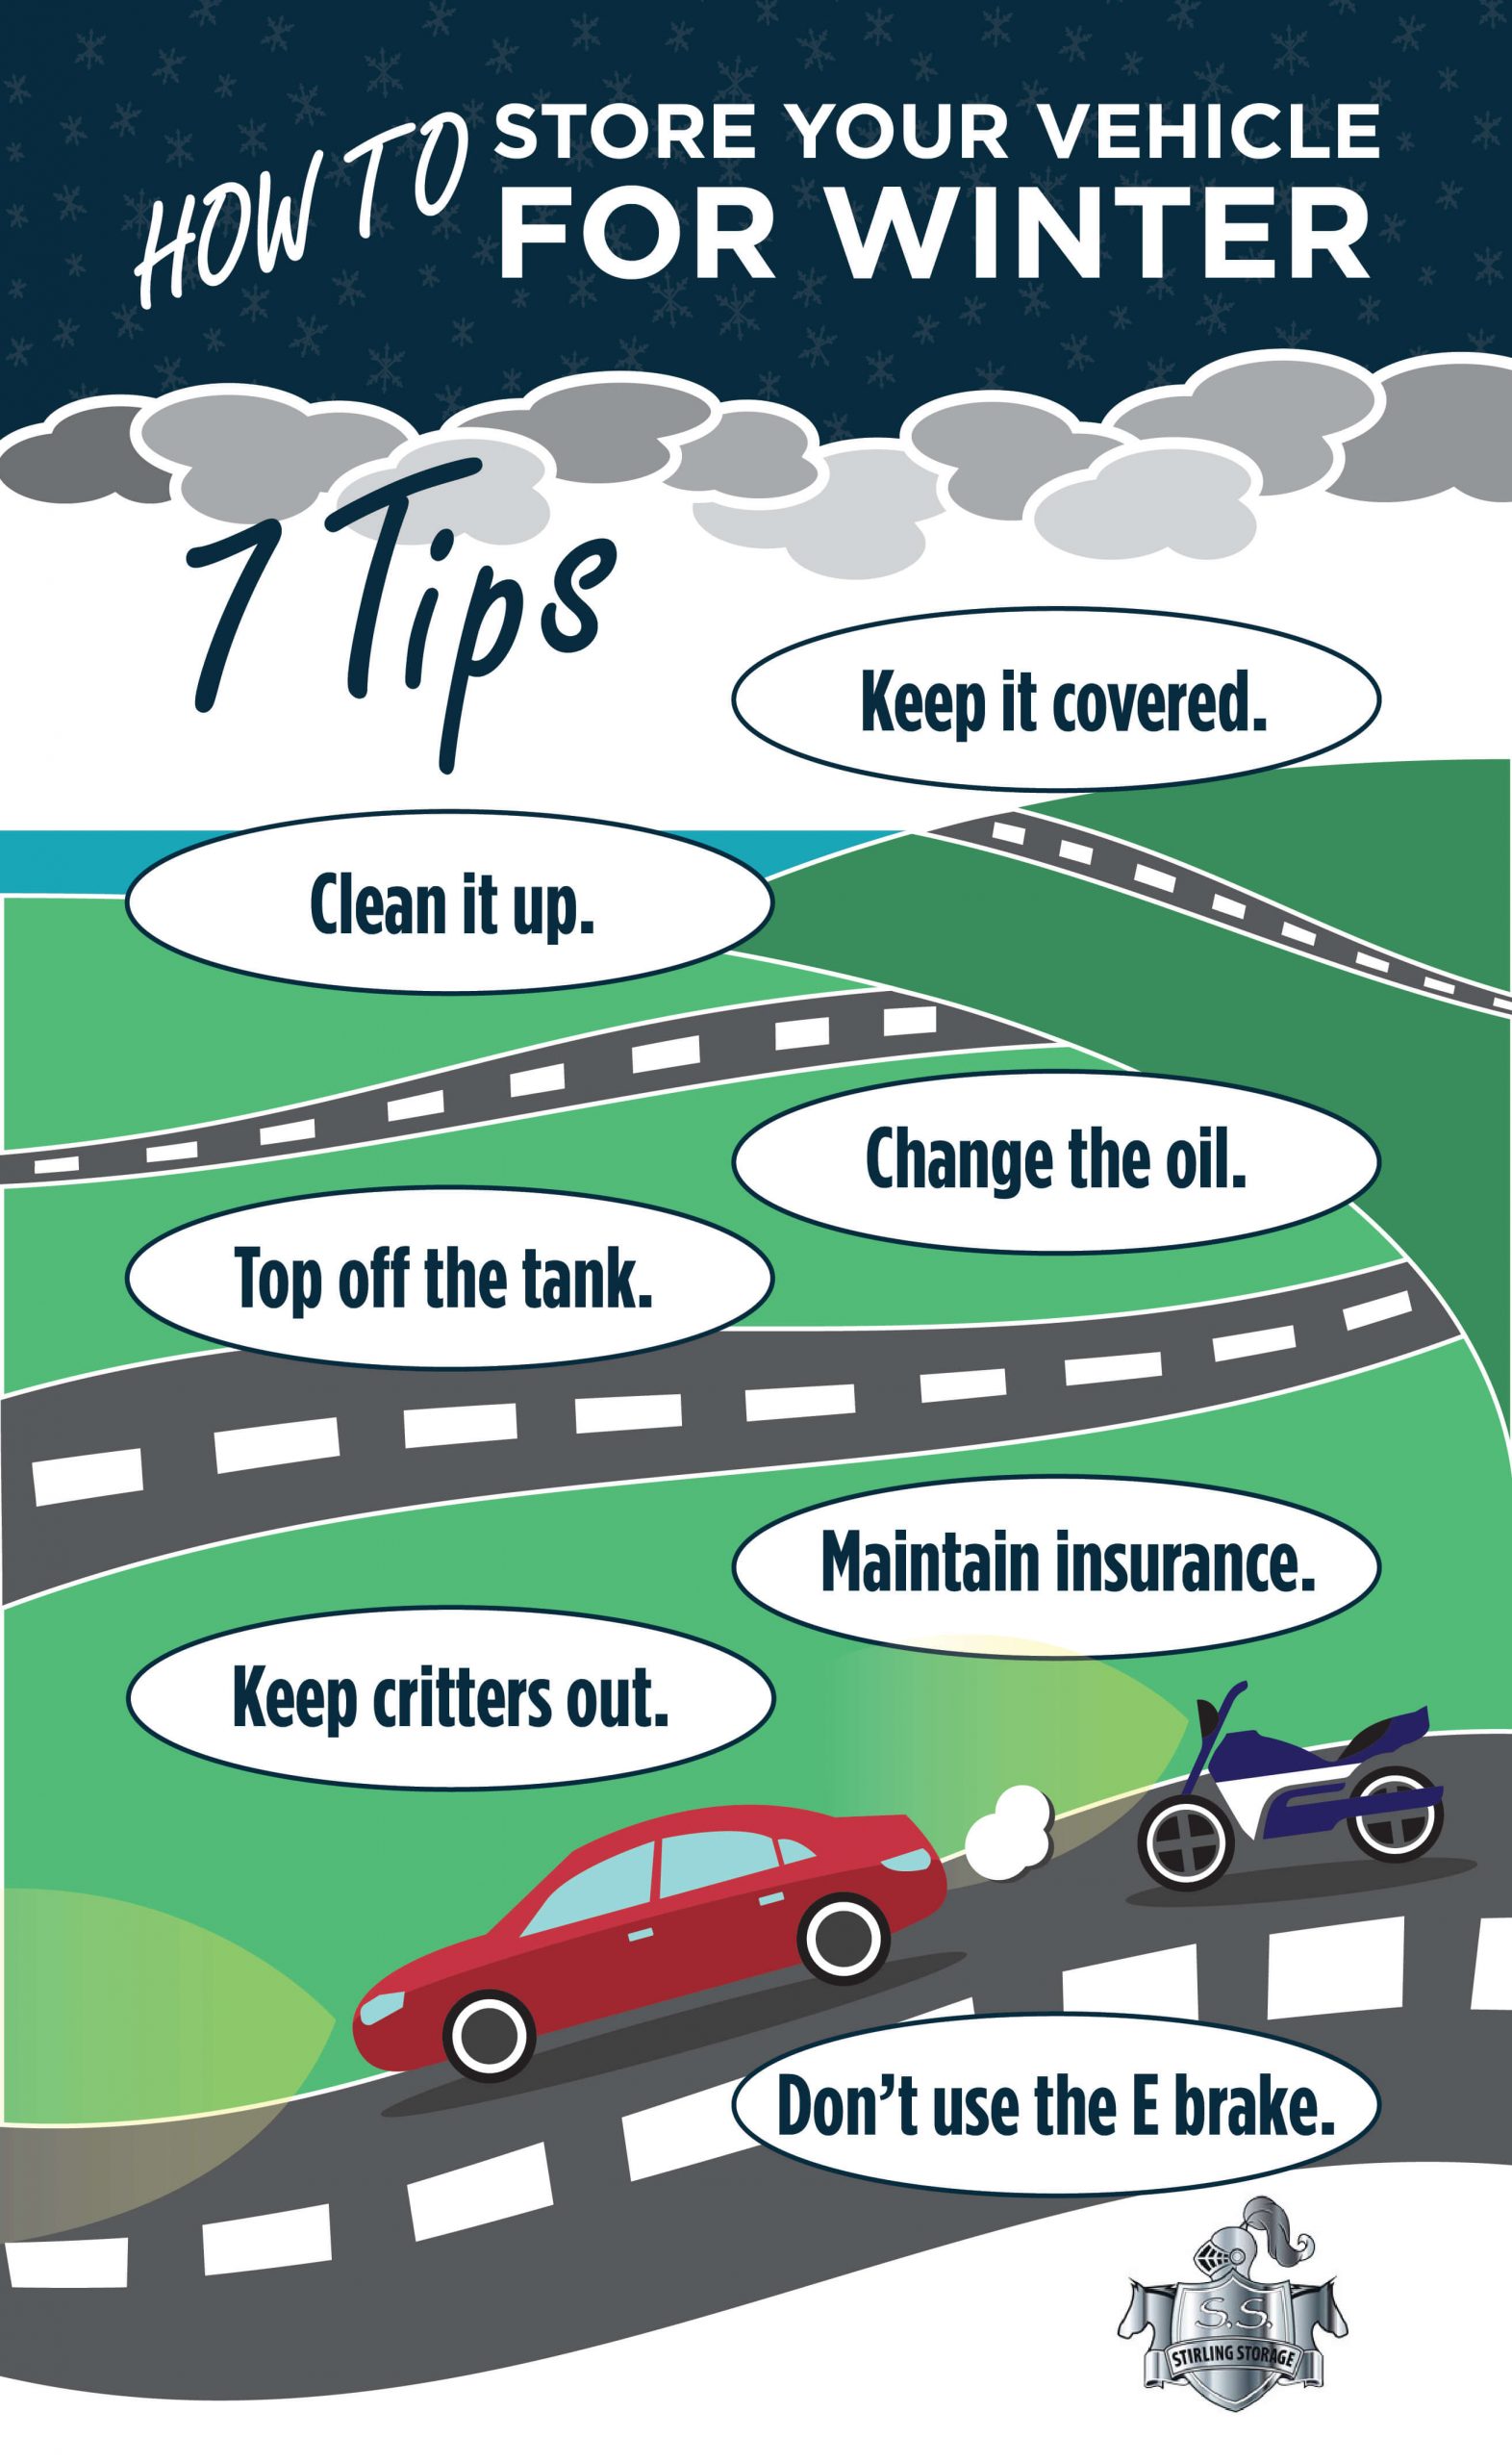 Steps to Get Your Vehicle Ready for Winter